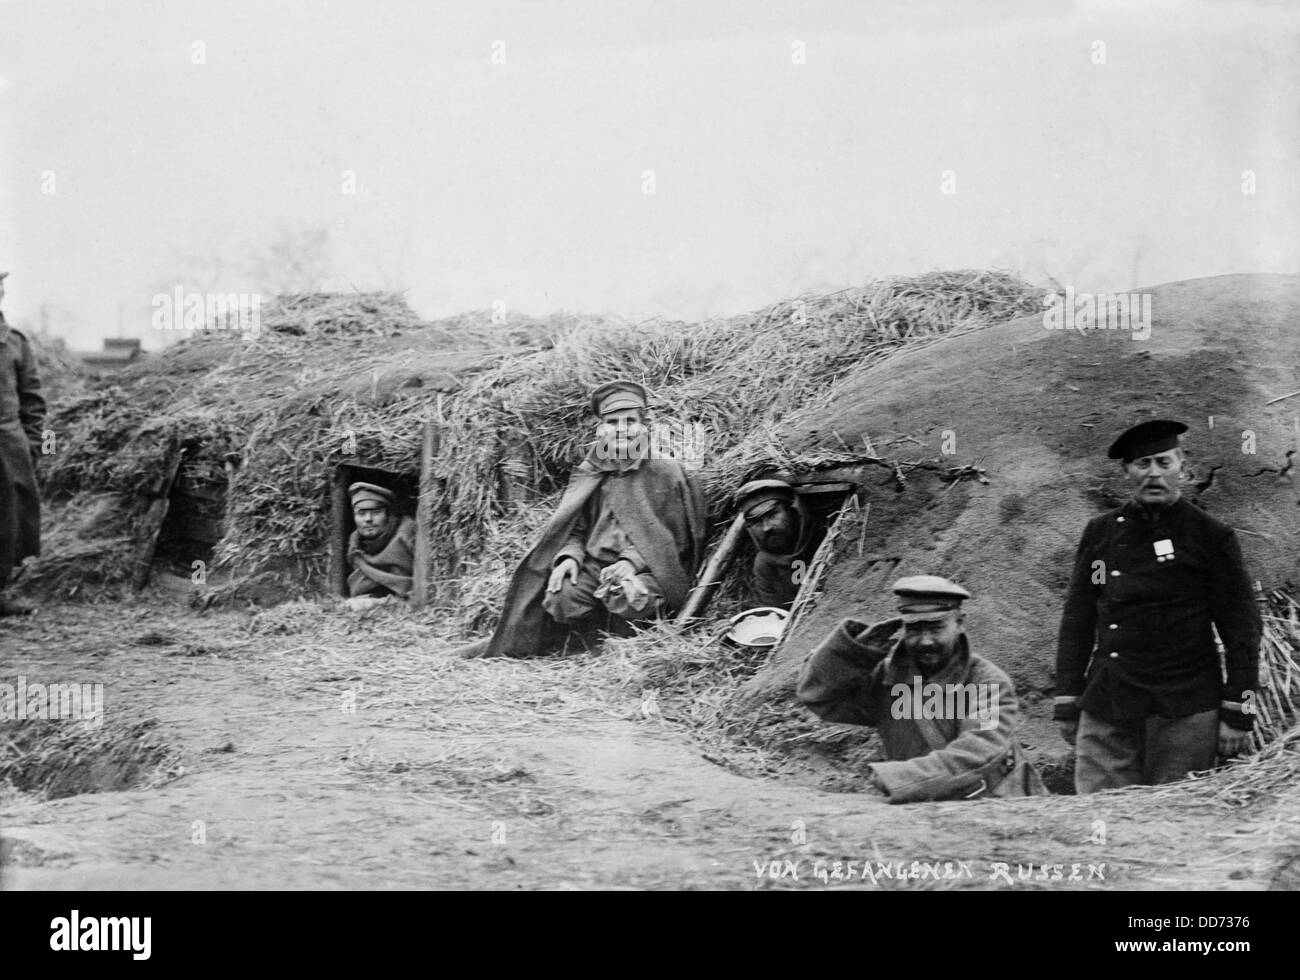 World War 1. Russian prisoners of war at Stettin, Prussia, in their dug out shelters. An estimated 90% of Russian POW's Stock Photo